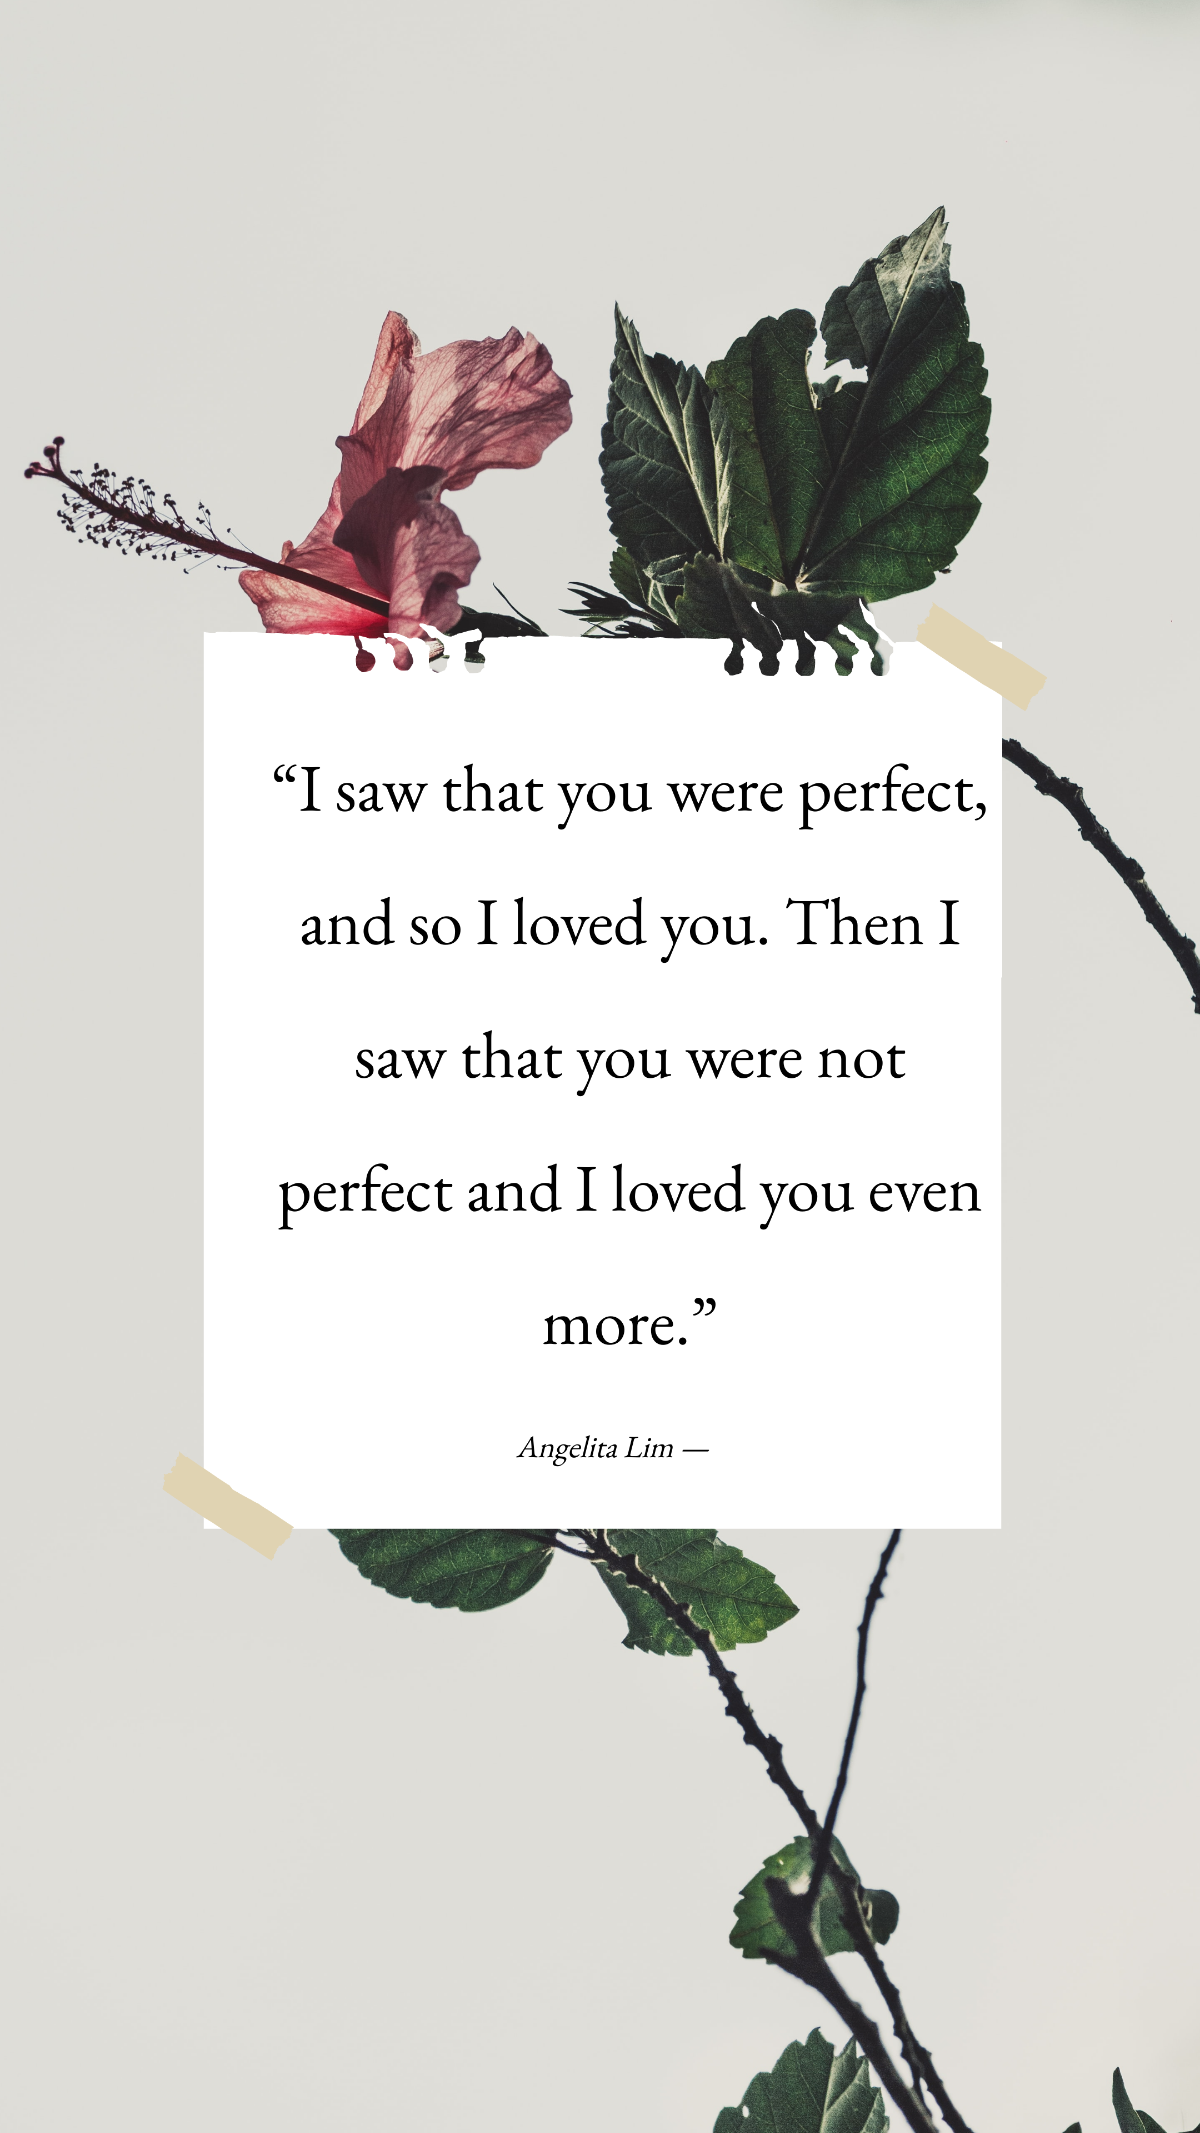 Angelita Lim — “I saw that you were perfect, and so I loved you. Then I ...